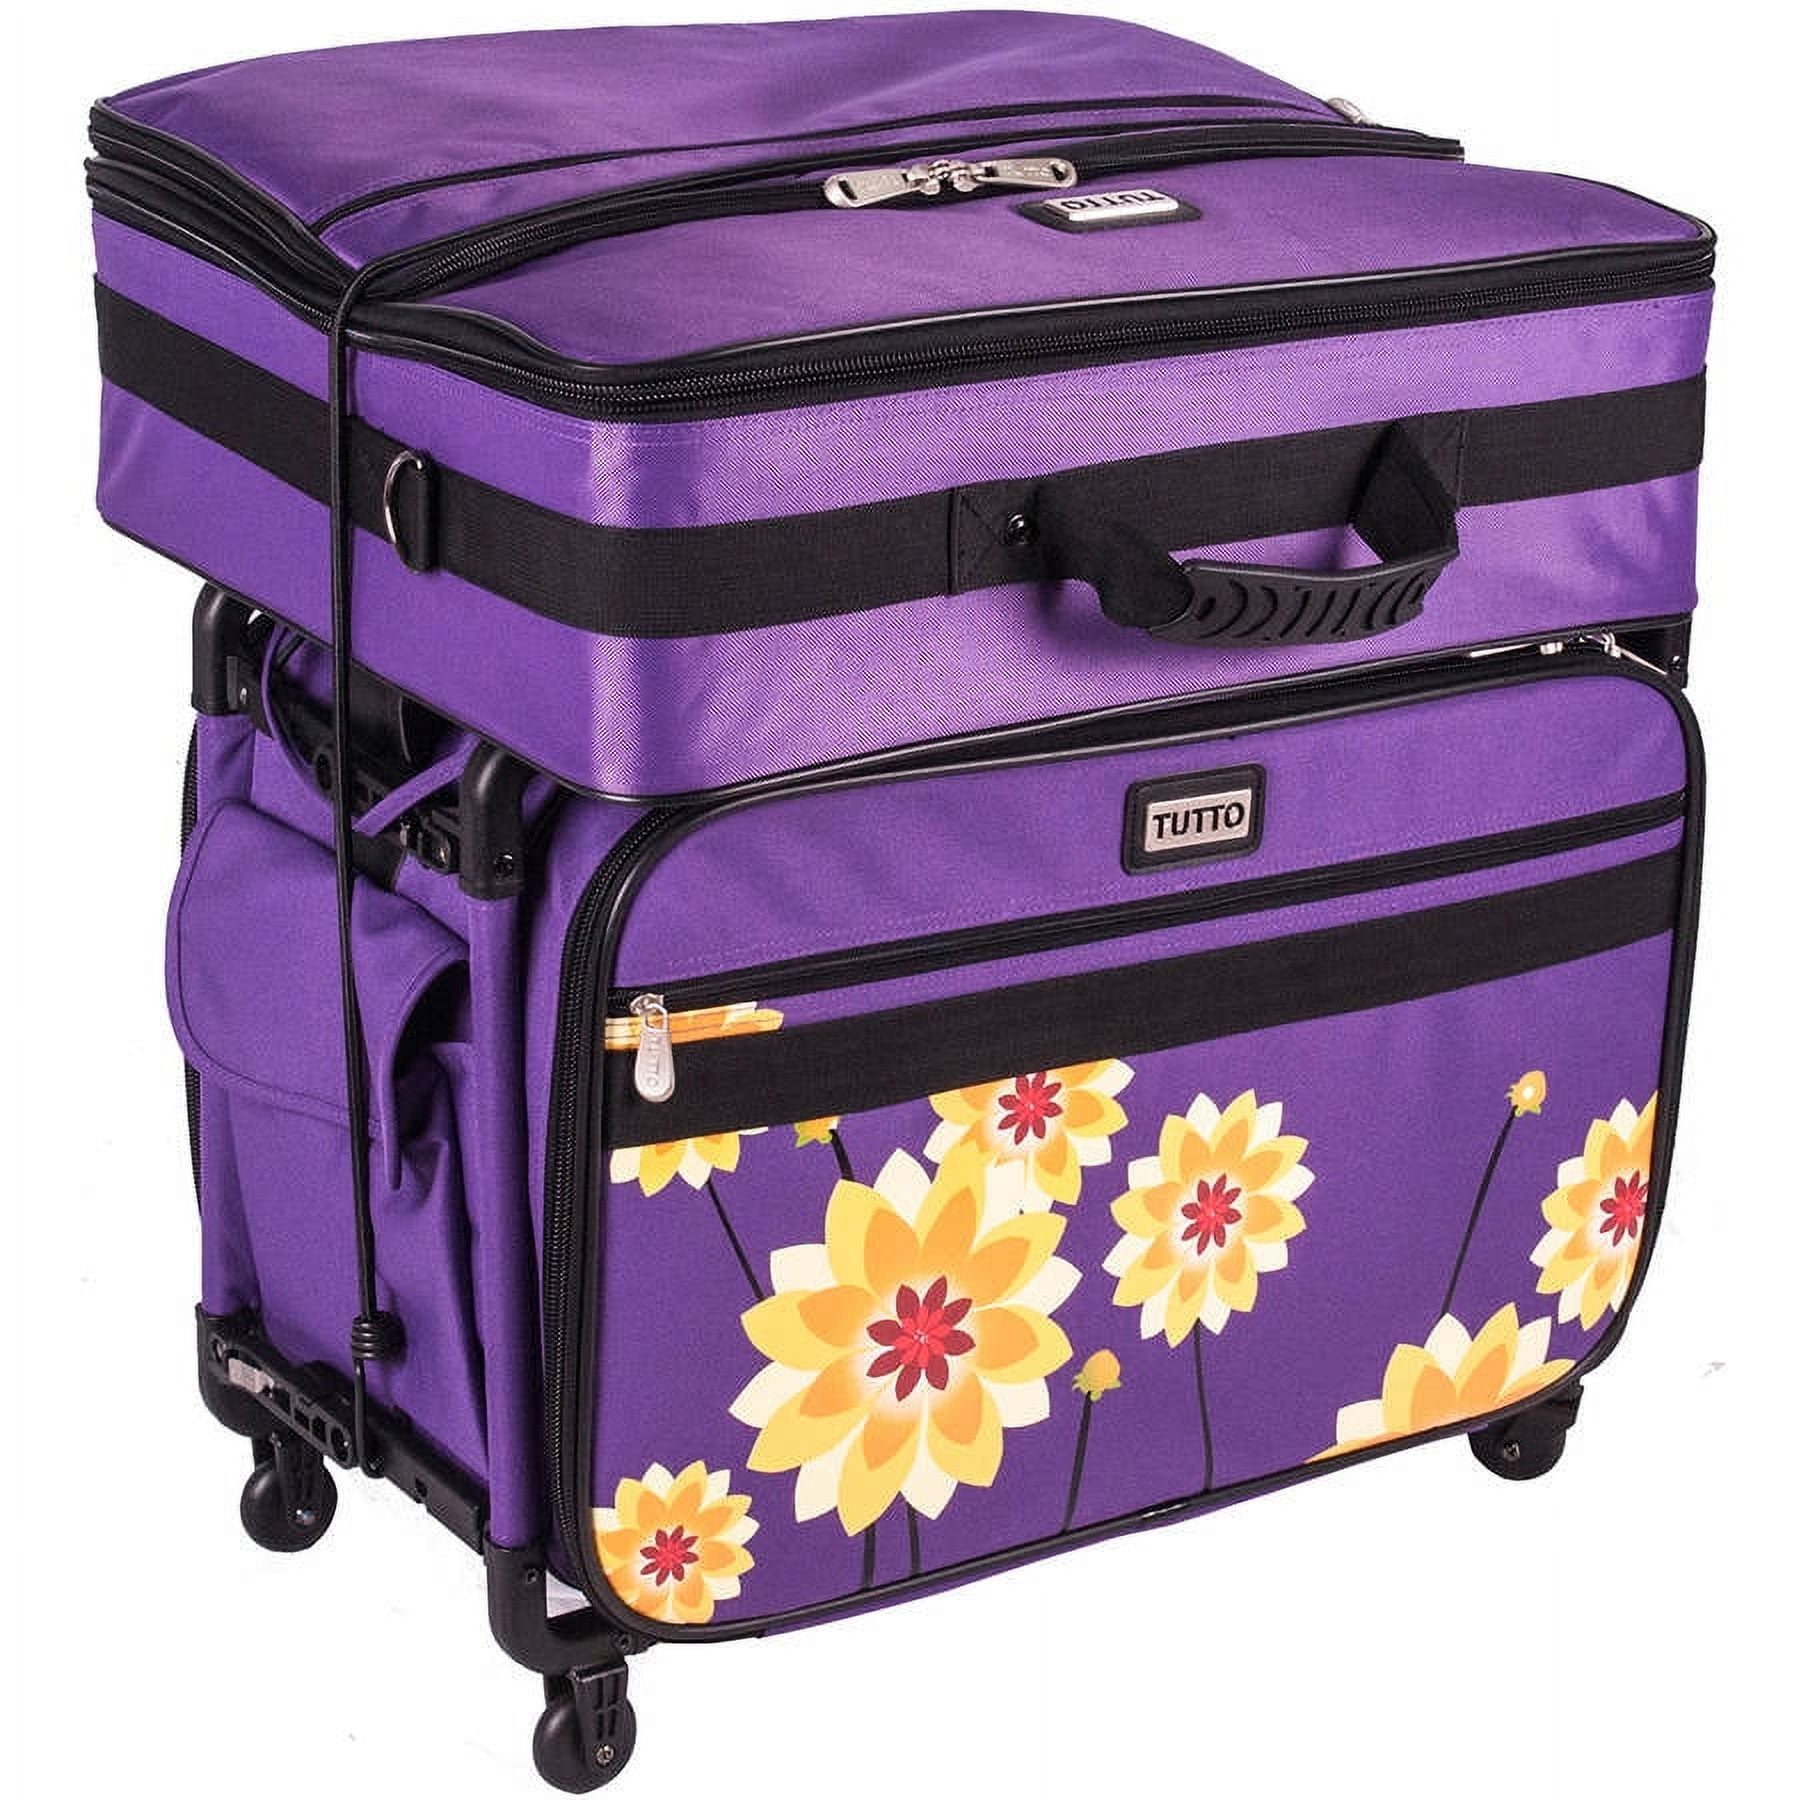 Tutto Sewing Machine Case On Wheels 2X Large 28in Purple